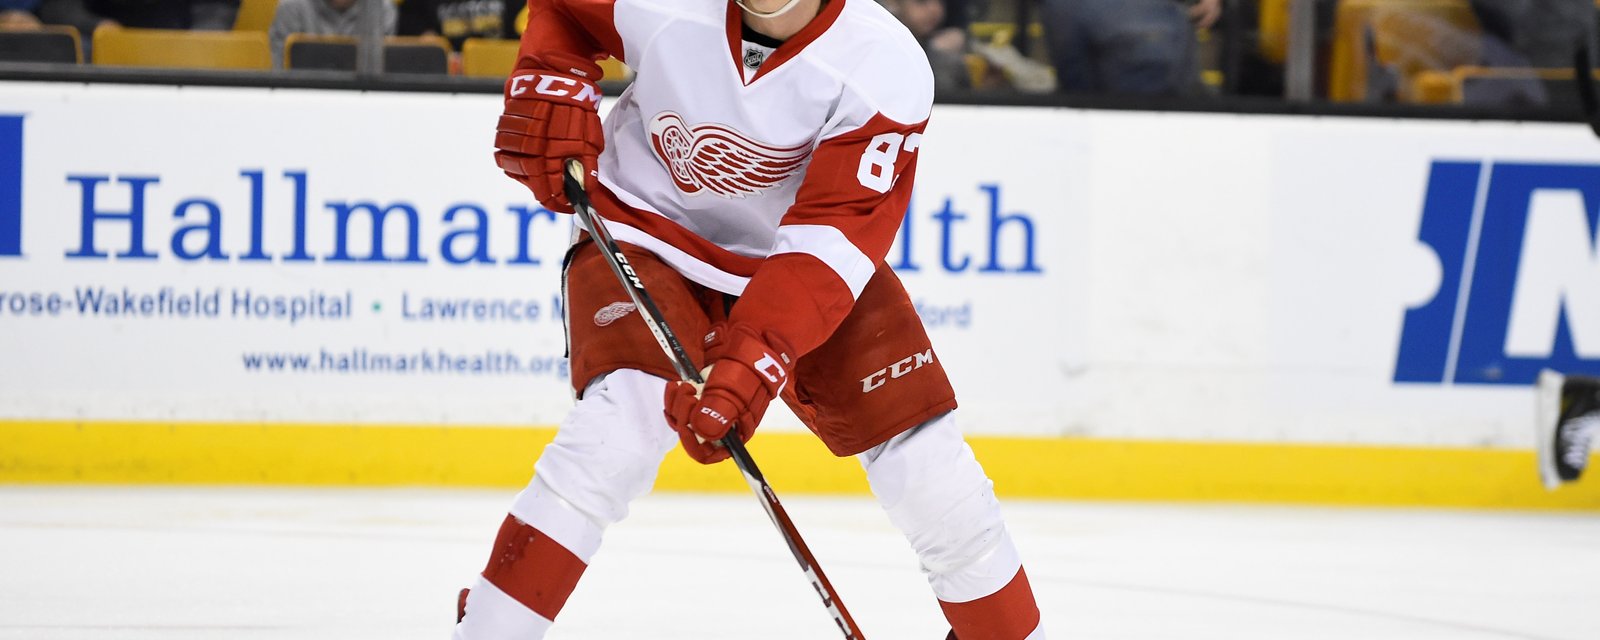 Breaking: Las Vegas has reportedly selected which Red Wings player they will take.